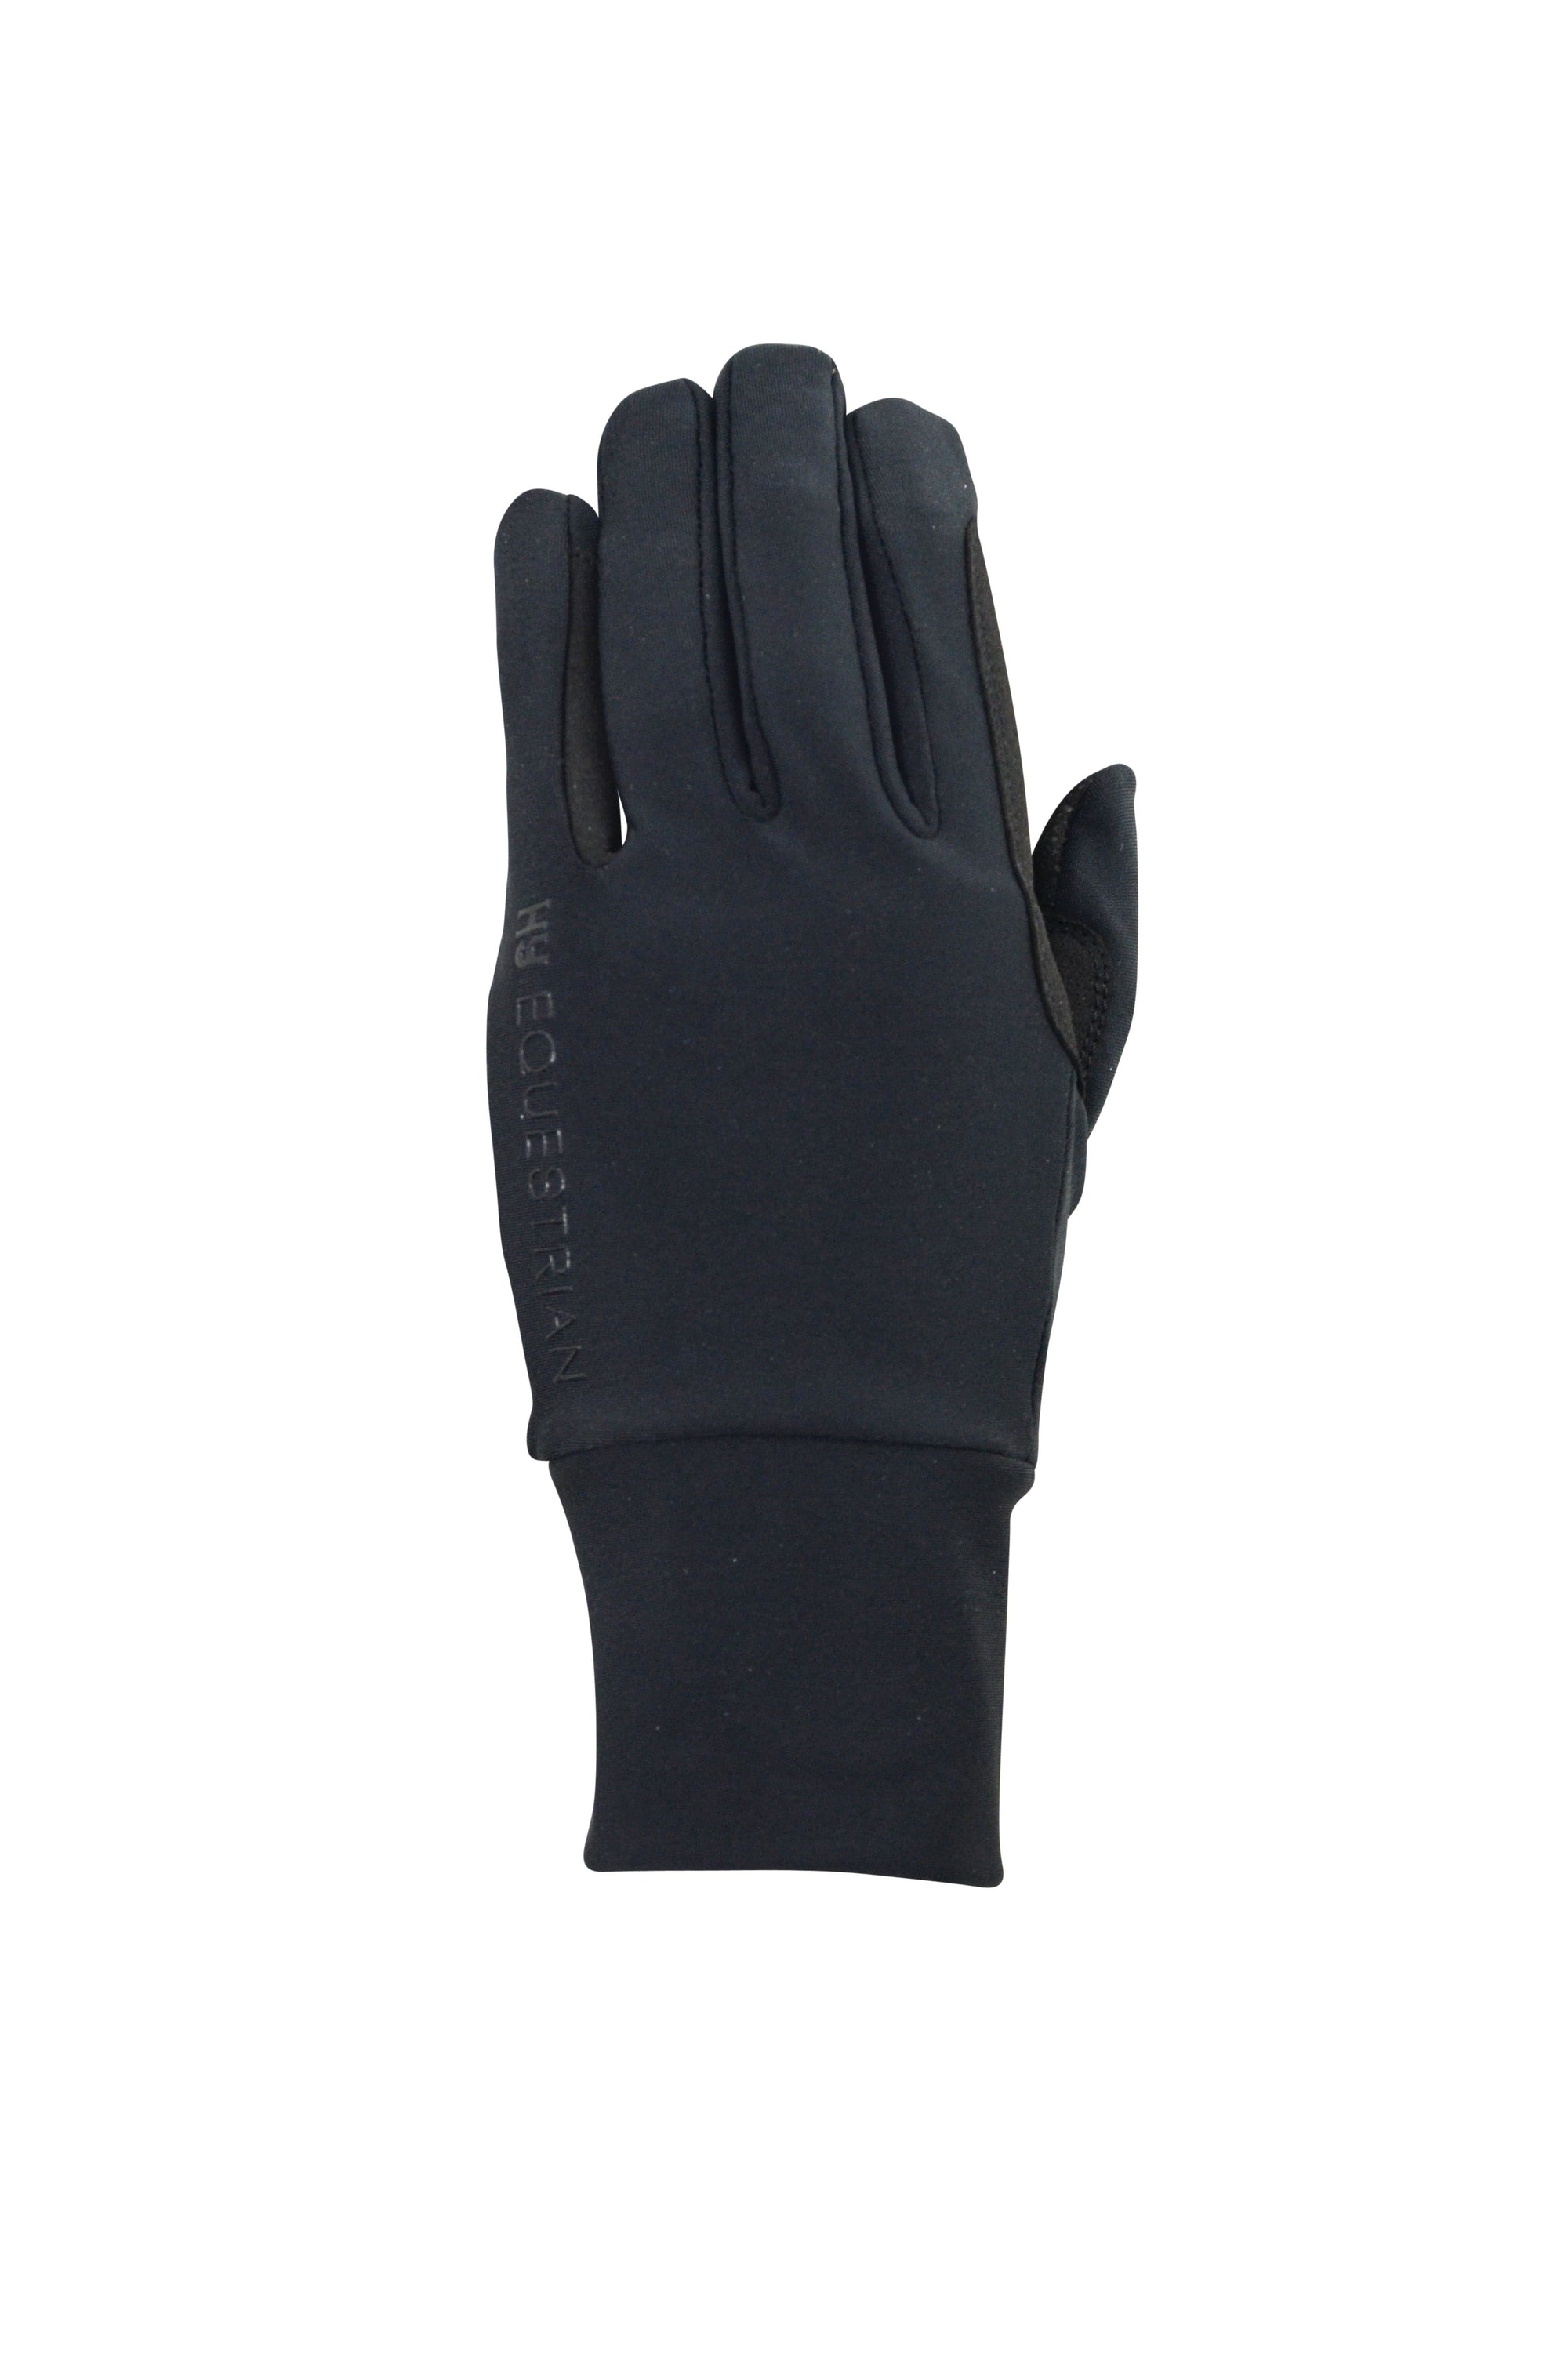 Hy equestrian snowstorm riding and general glove